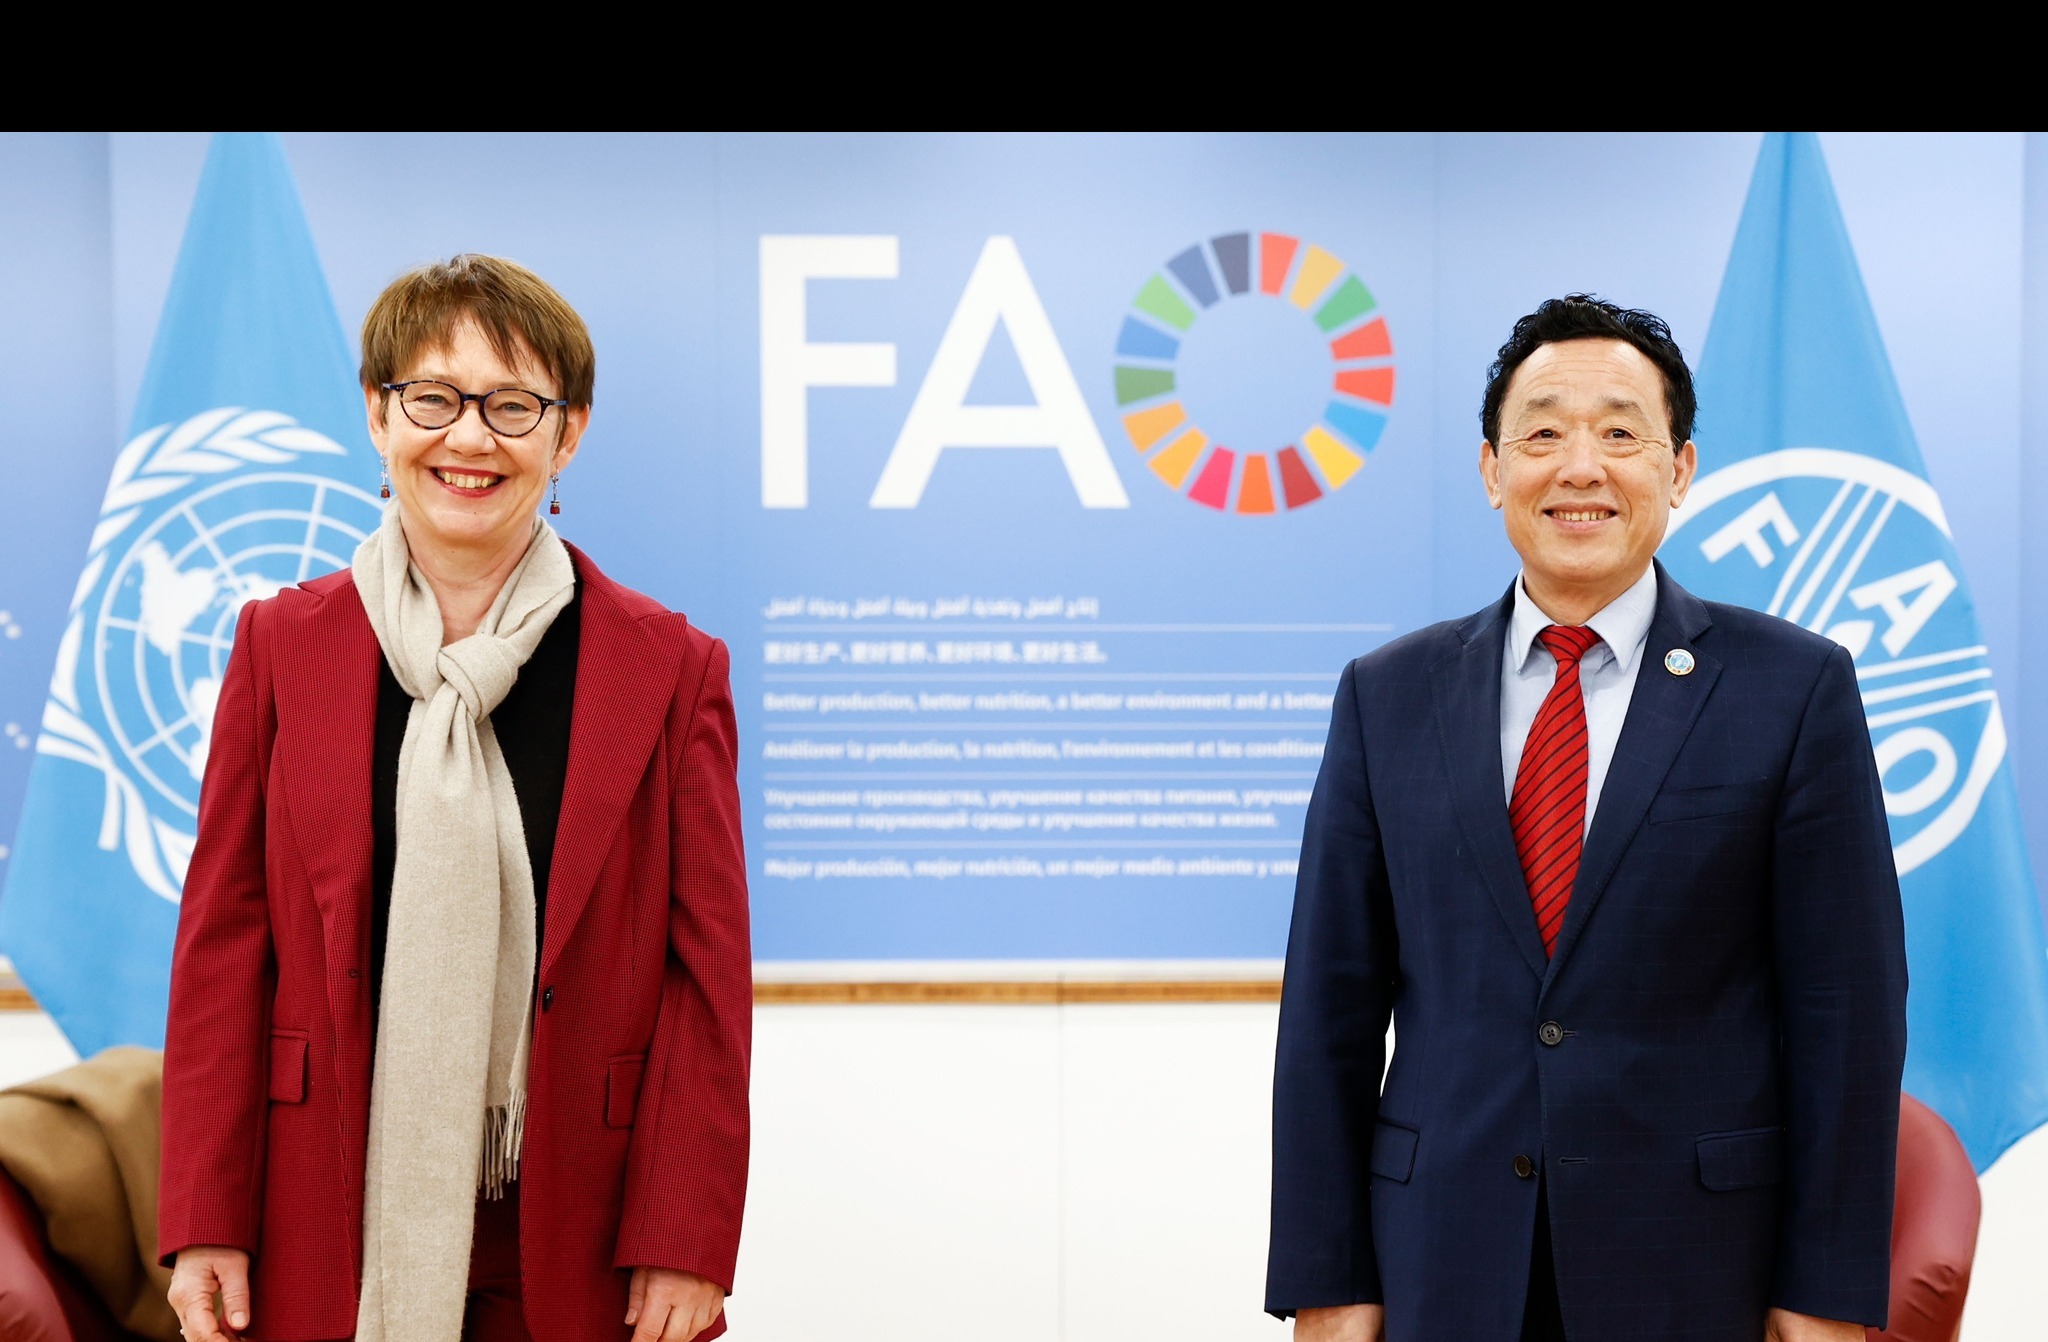 FAO Director-General QU Dongyu meeting with Odile Renaud-Basso, President of the European Bank for Reconstruction and Development (EBRD), FAO headquarters (Iraq room).